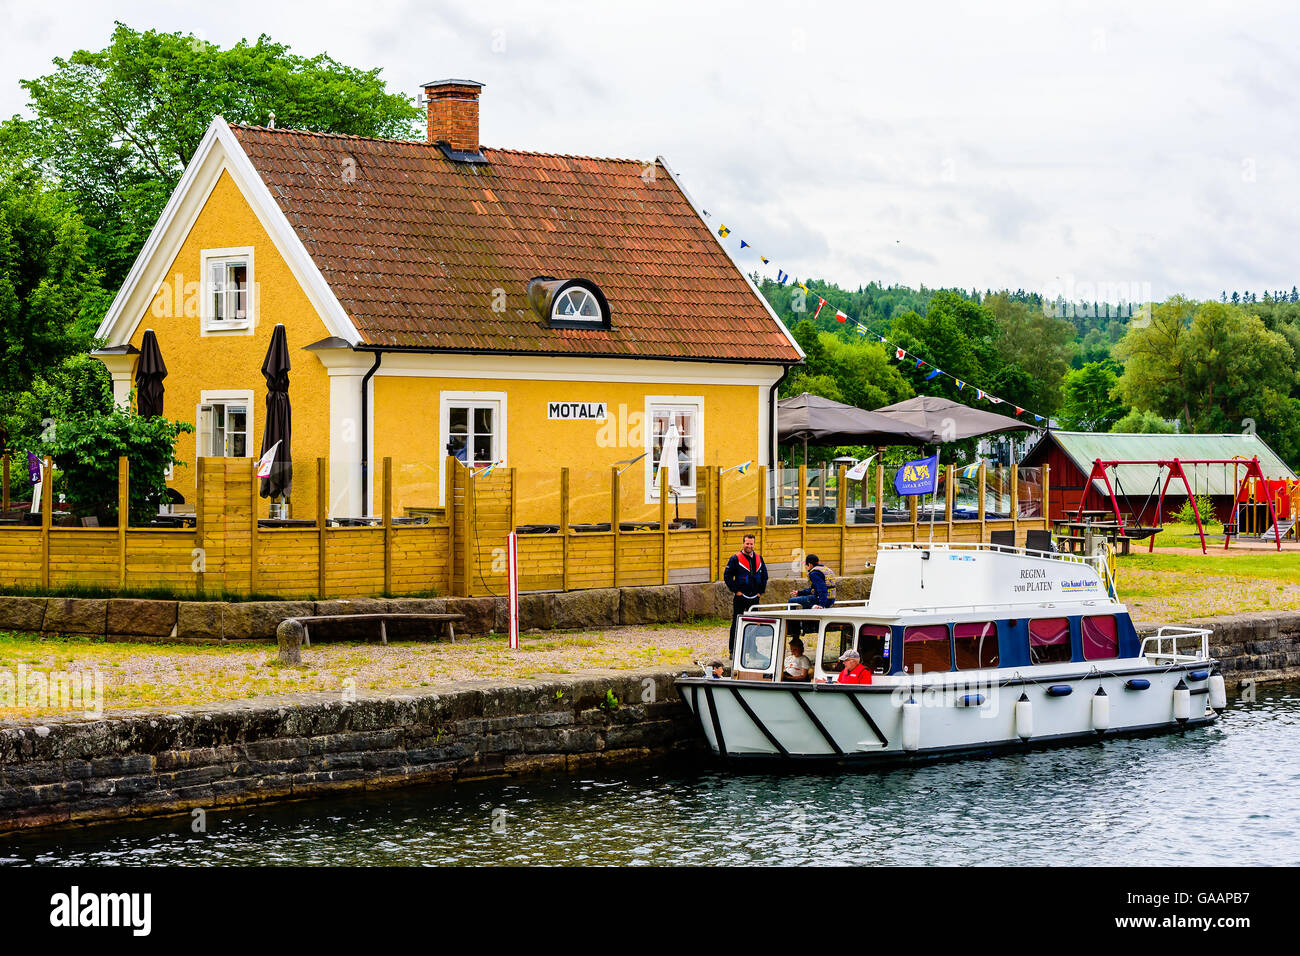 Motala, Sweden - June 21, 2016: Small yellow house with the text Motala on the facade. Chartered boat moored outside in the cana Stock Photo